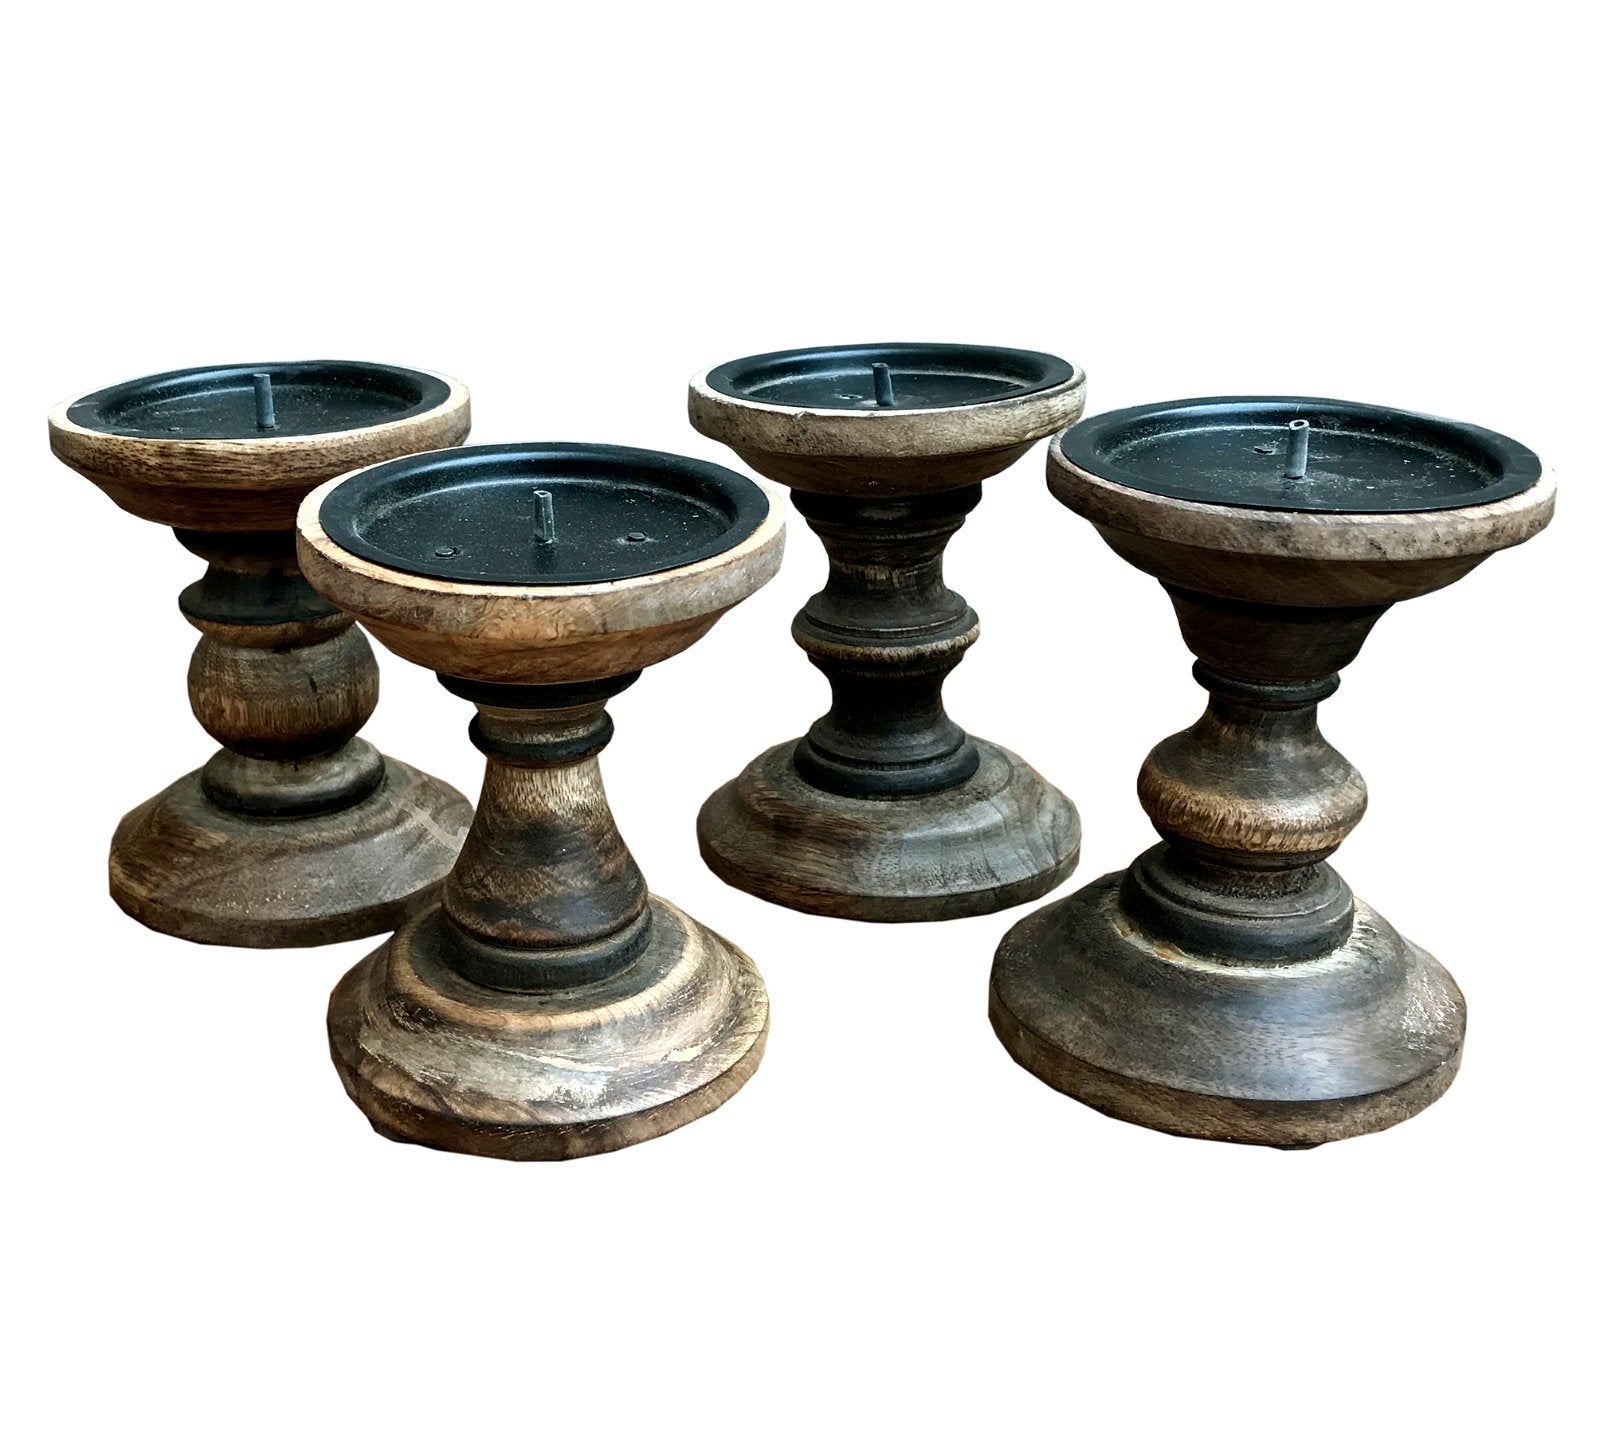 View Set of 4 Brown Wooden Candlestick Church Pillar Candle Holders information